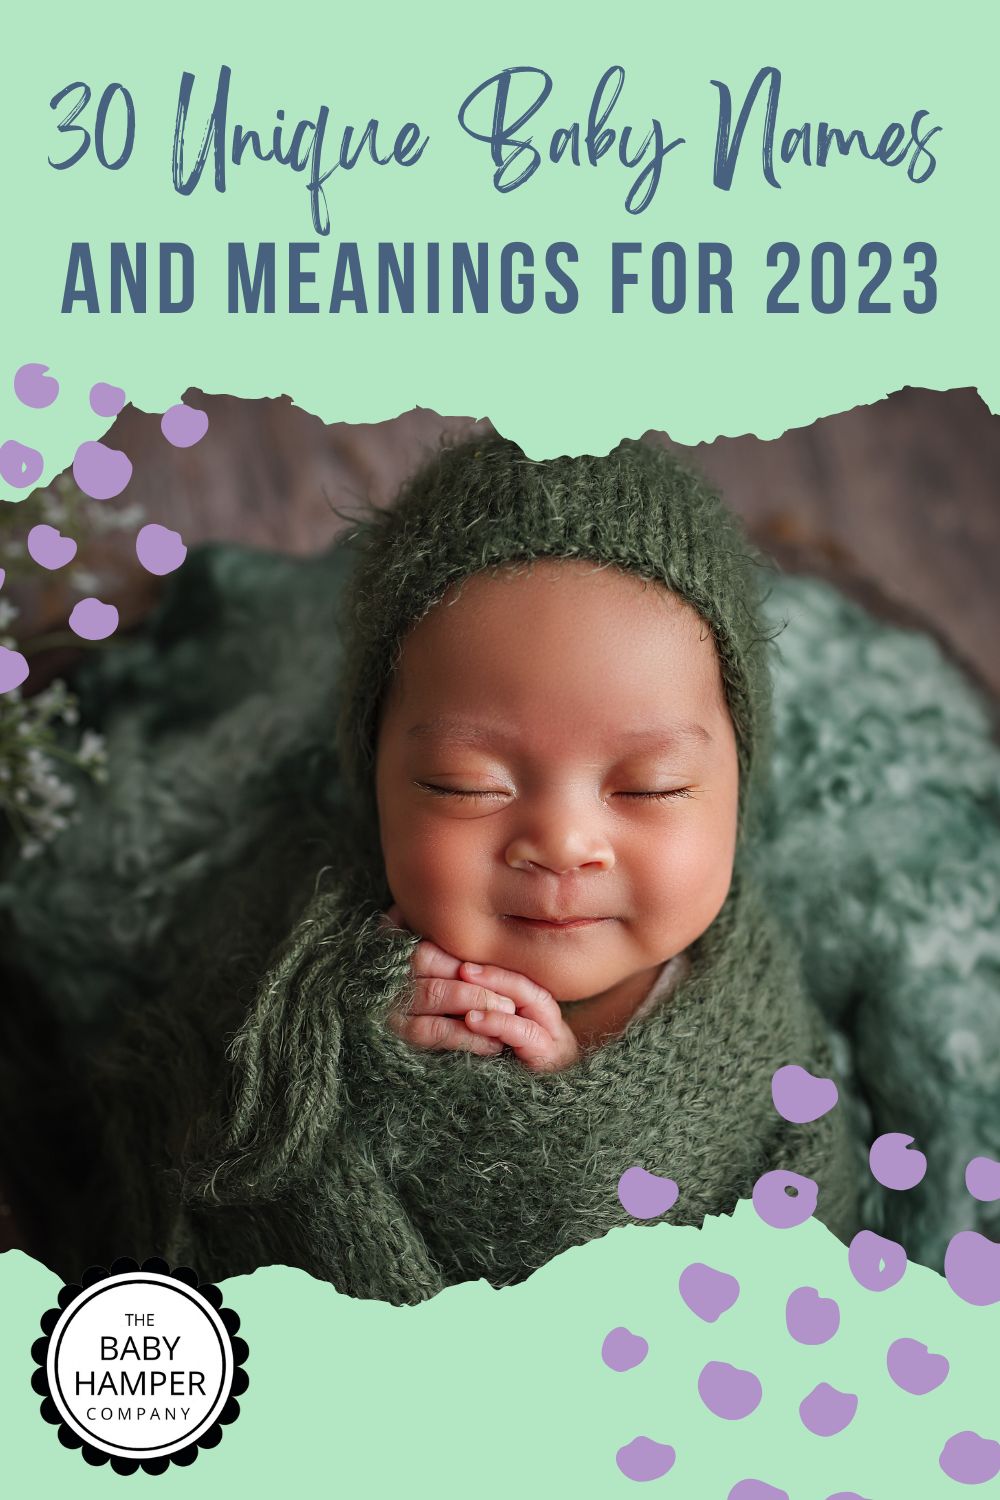 30 Unique Baby Names and Meanings For 2023